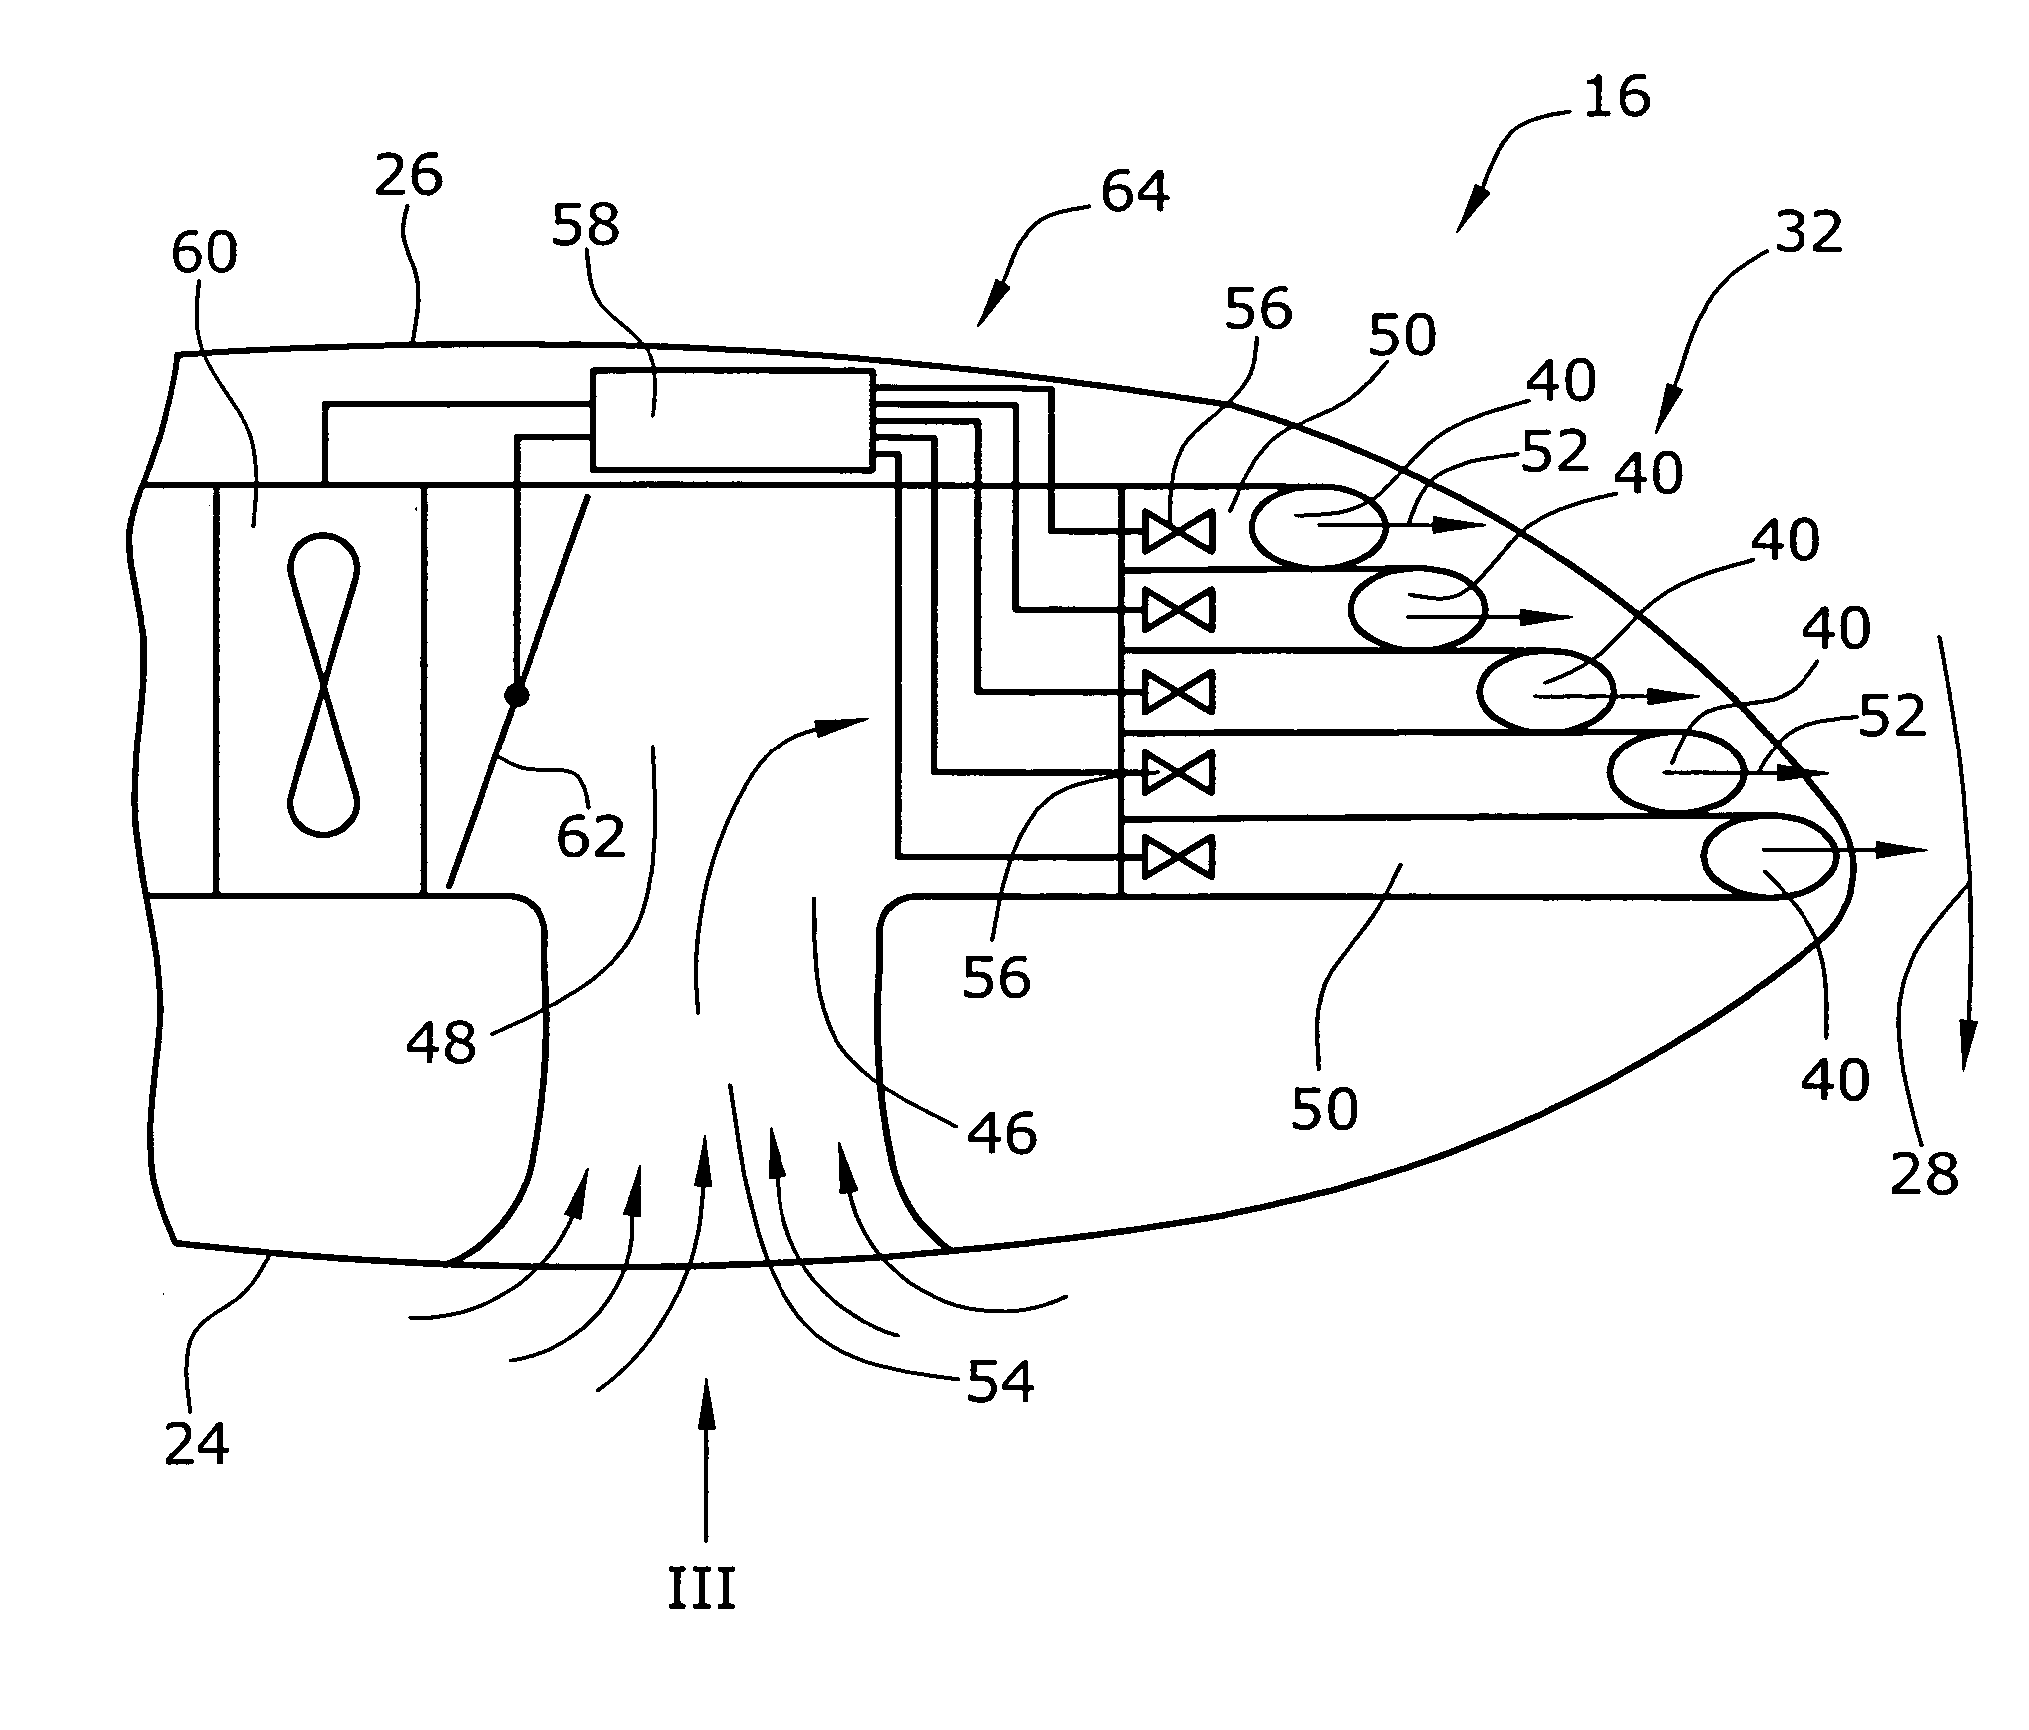 Blade for a rotor of a wind energy turbine